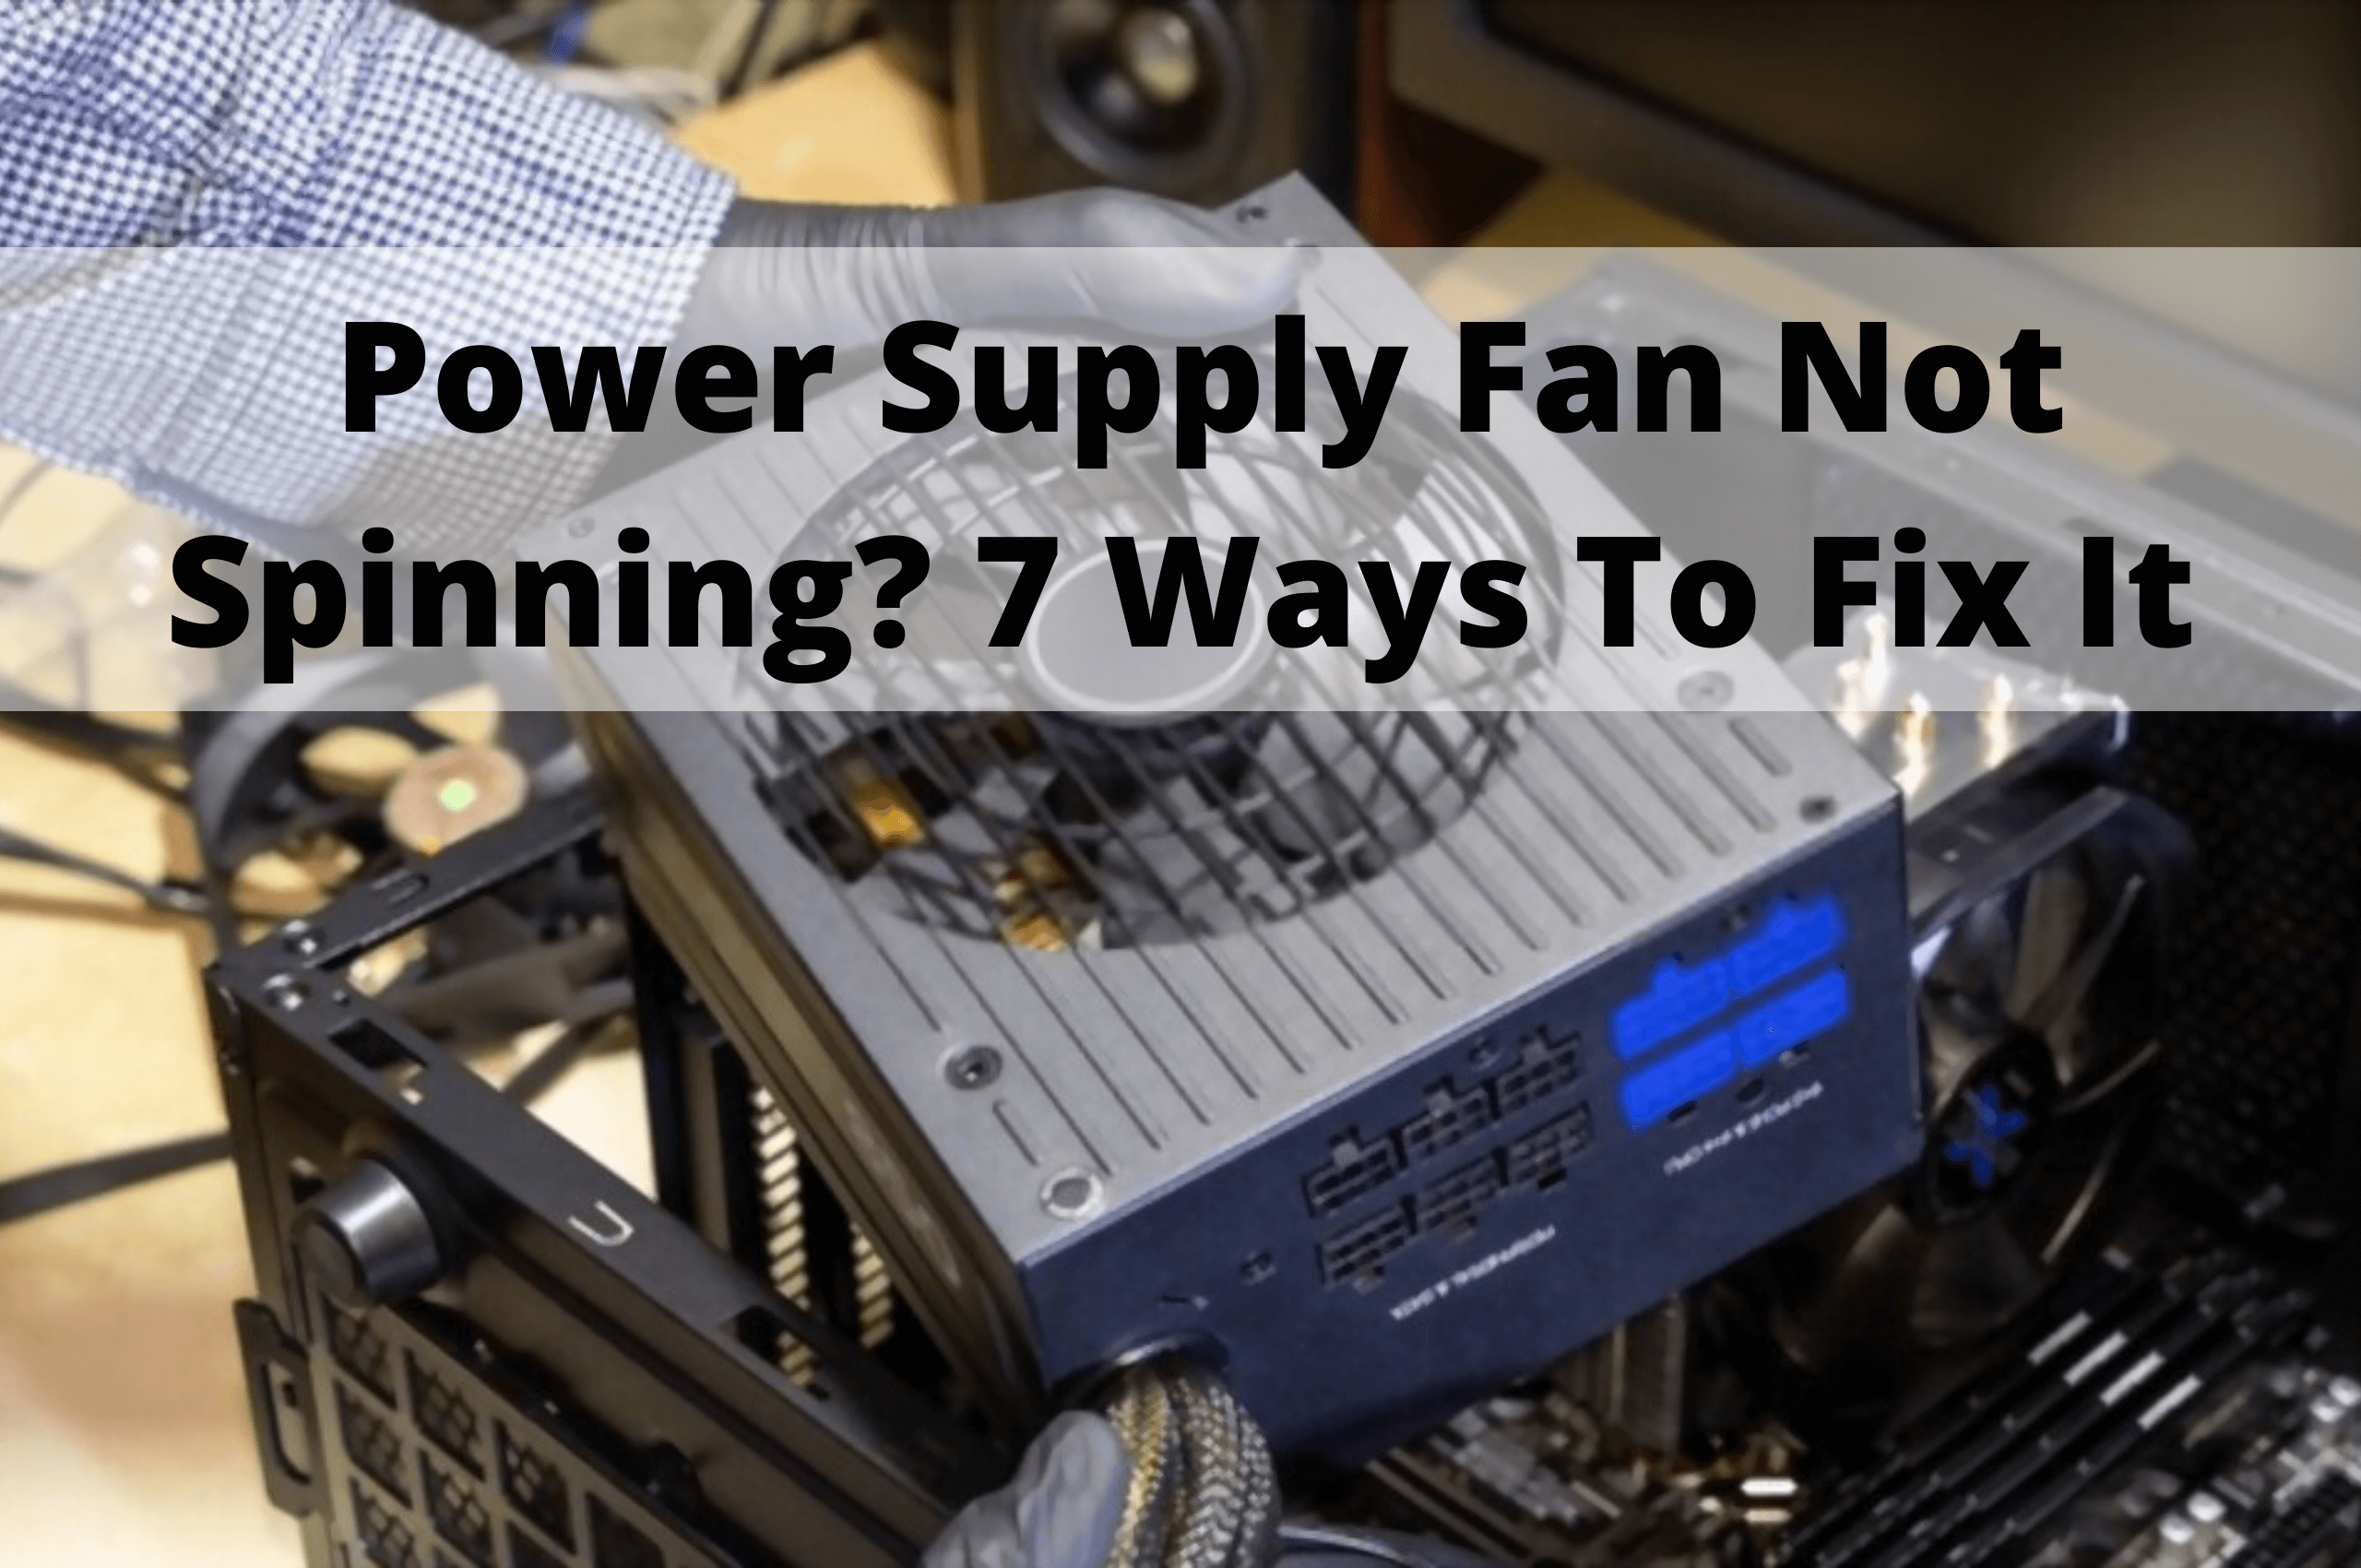 Nominering Ark podning Power Supply Fan Not Spinning? 7 Ways To Easily Fix It